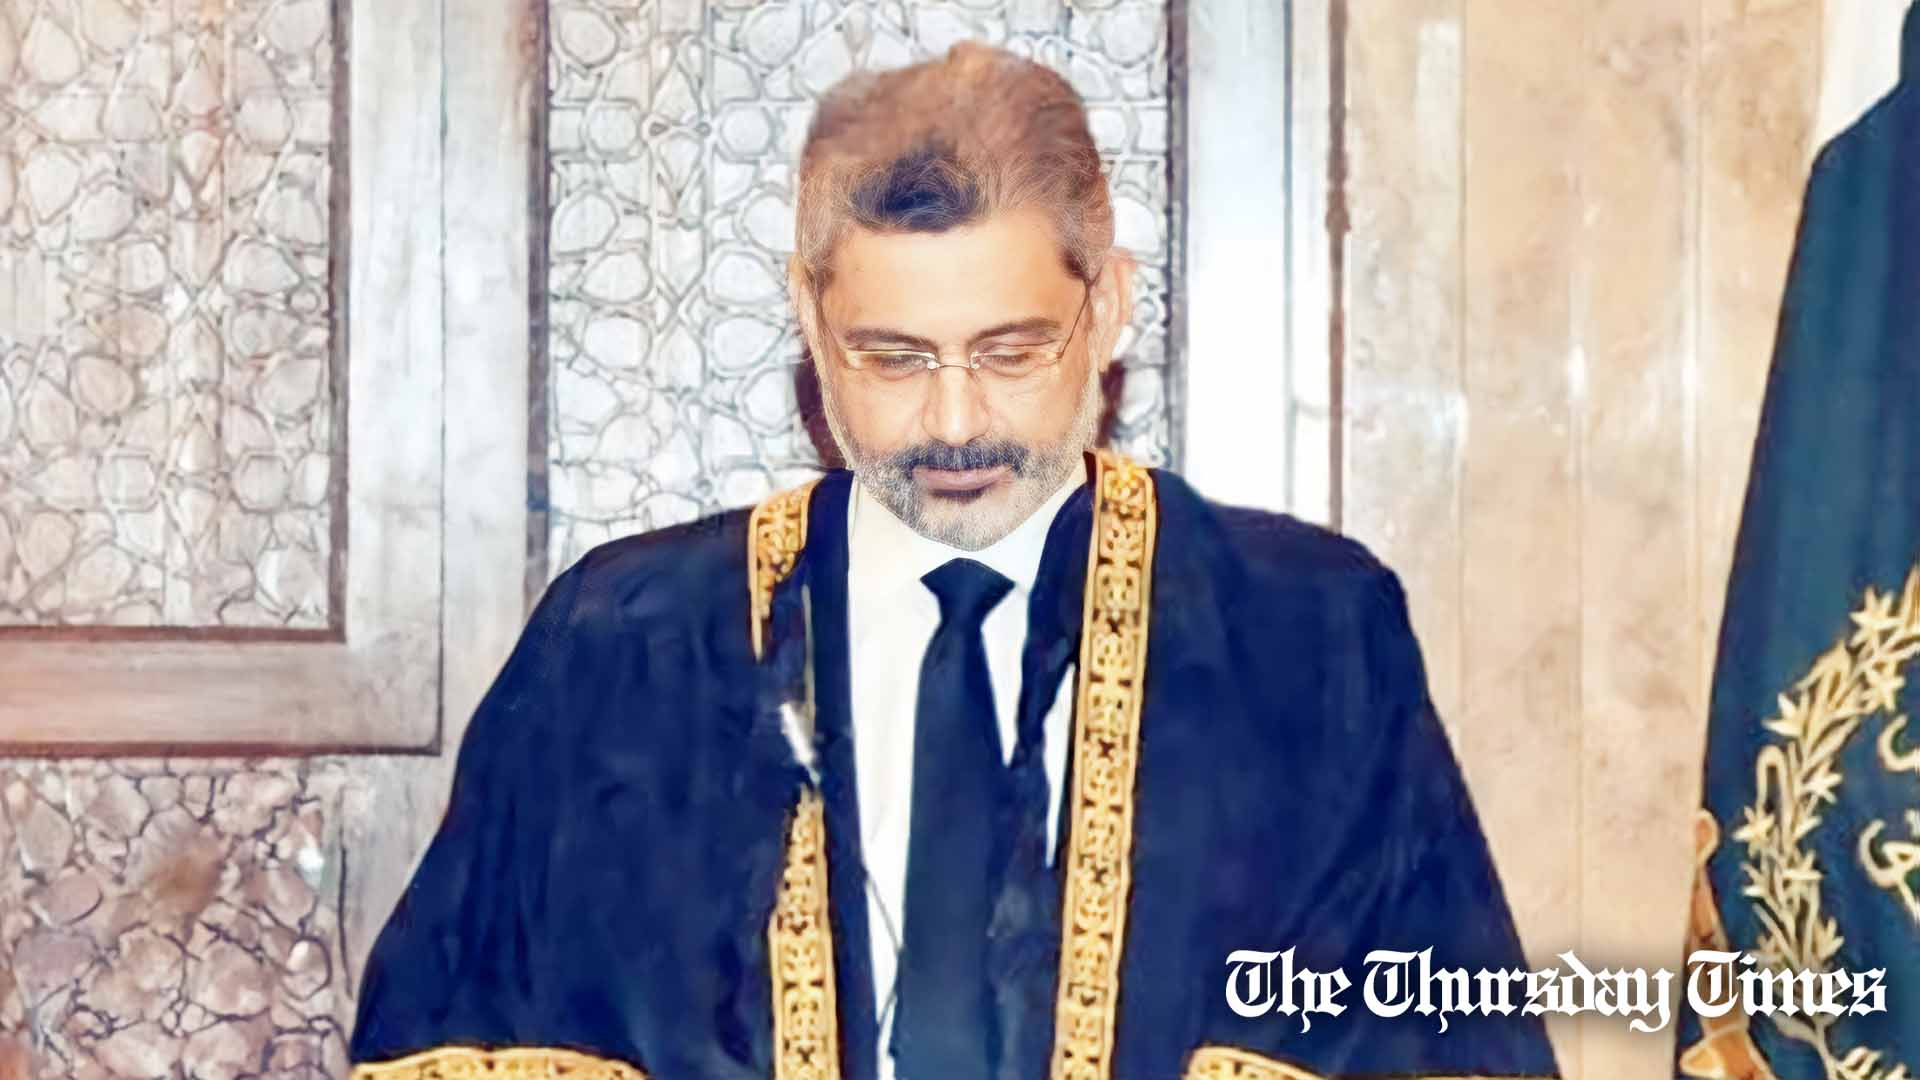 Chief Justice Qazi Faez Isa is shown at an oath-taking in 2014. — FILE/THE THURSDAY TIMES